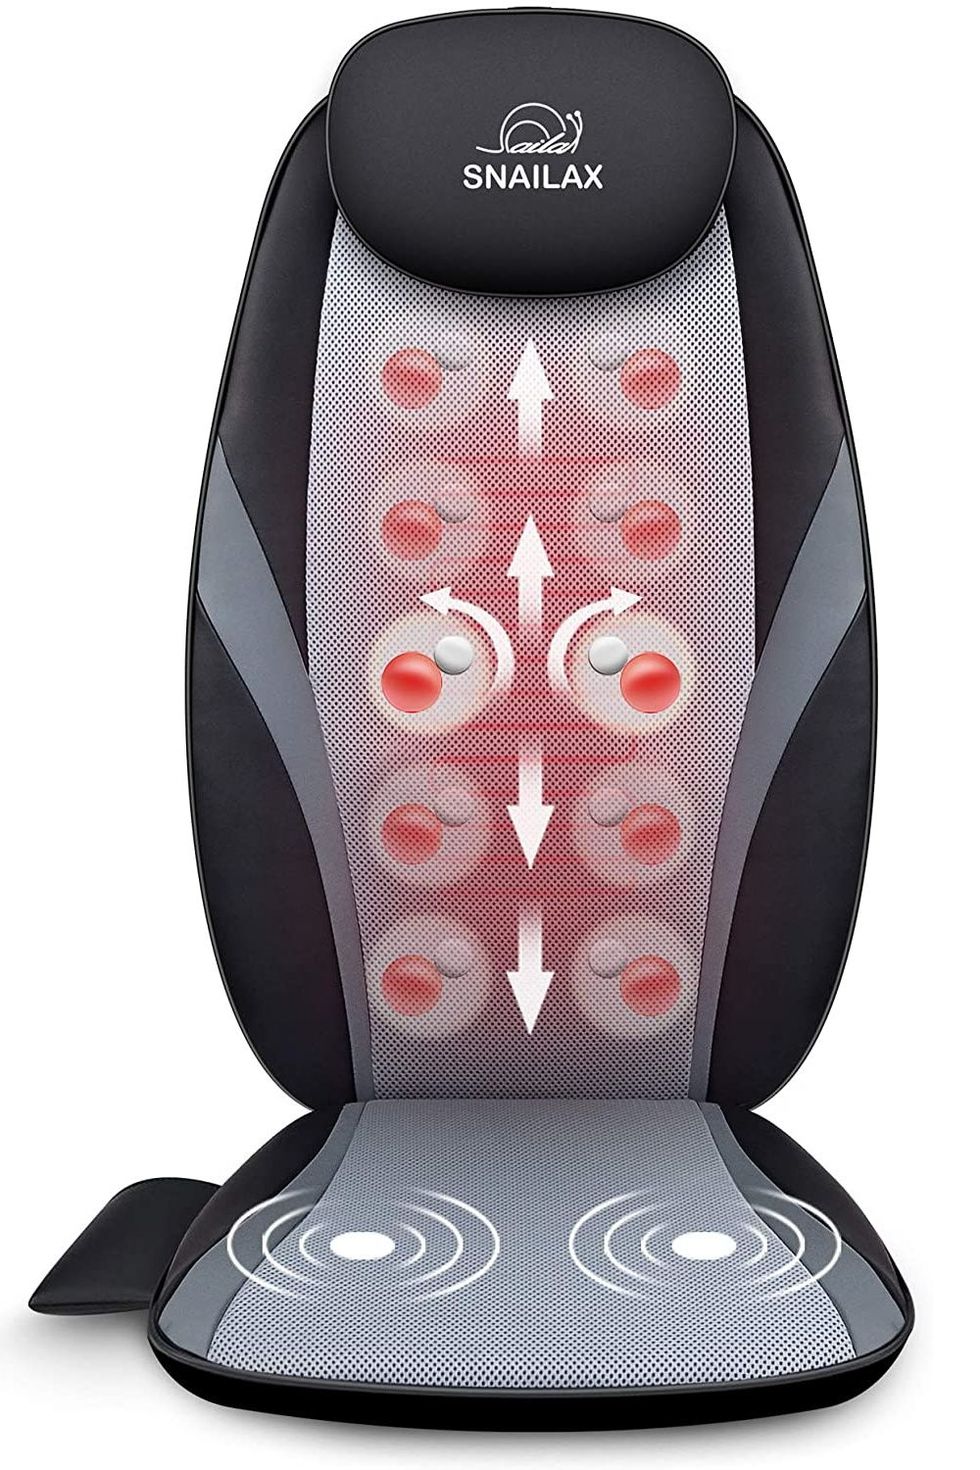 13 Best Back Massagers of 2022 According to Reviews and Ratings